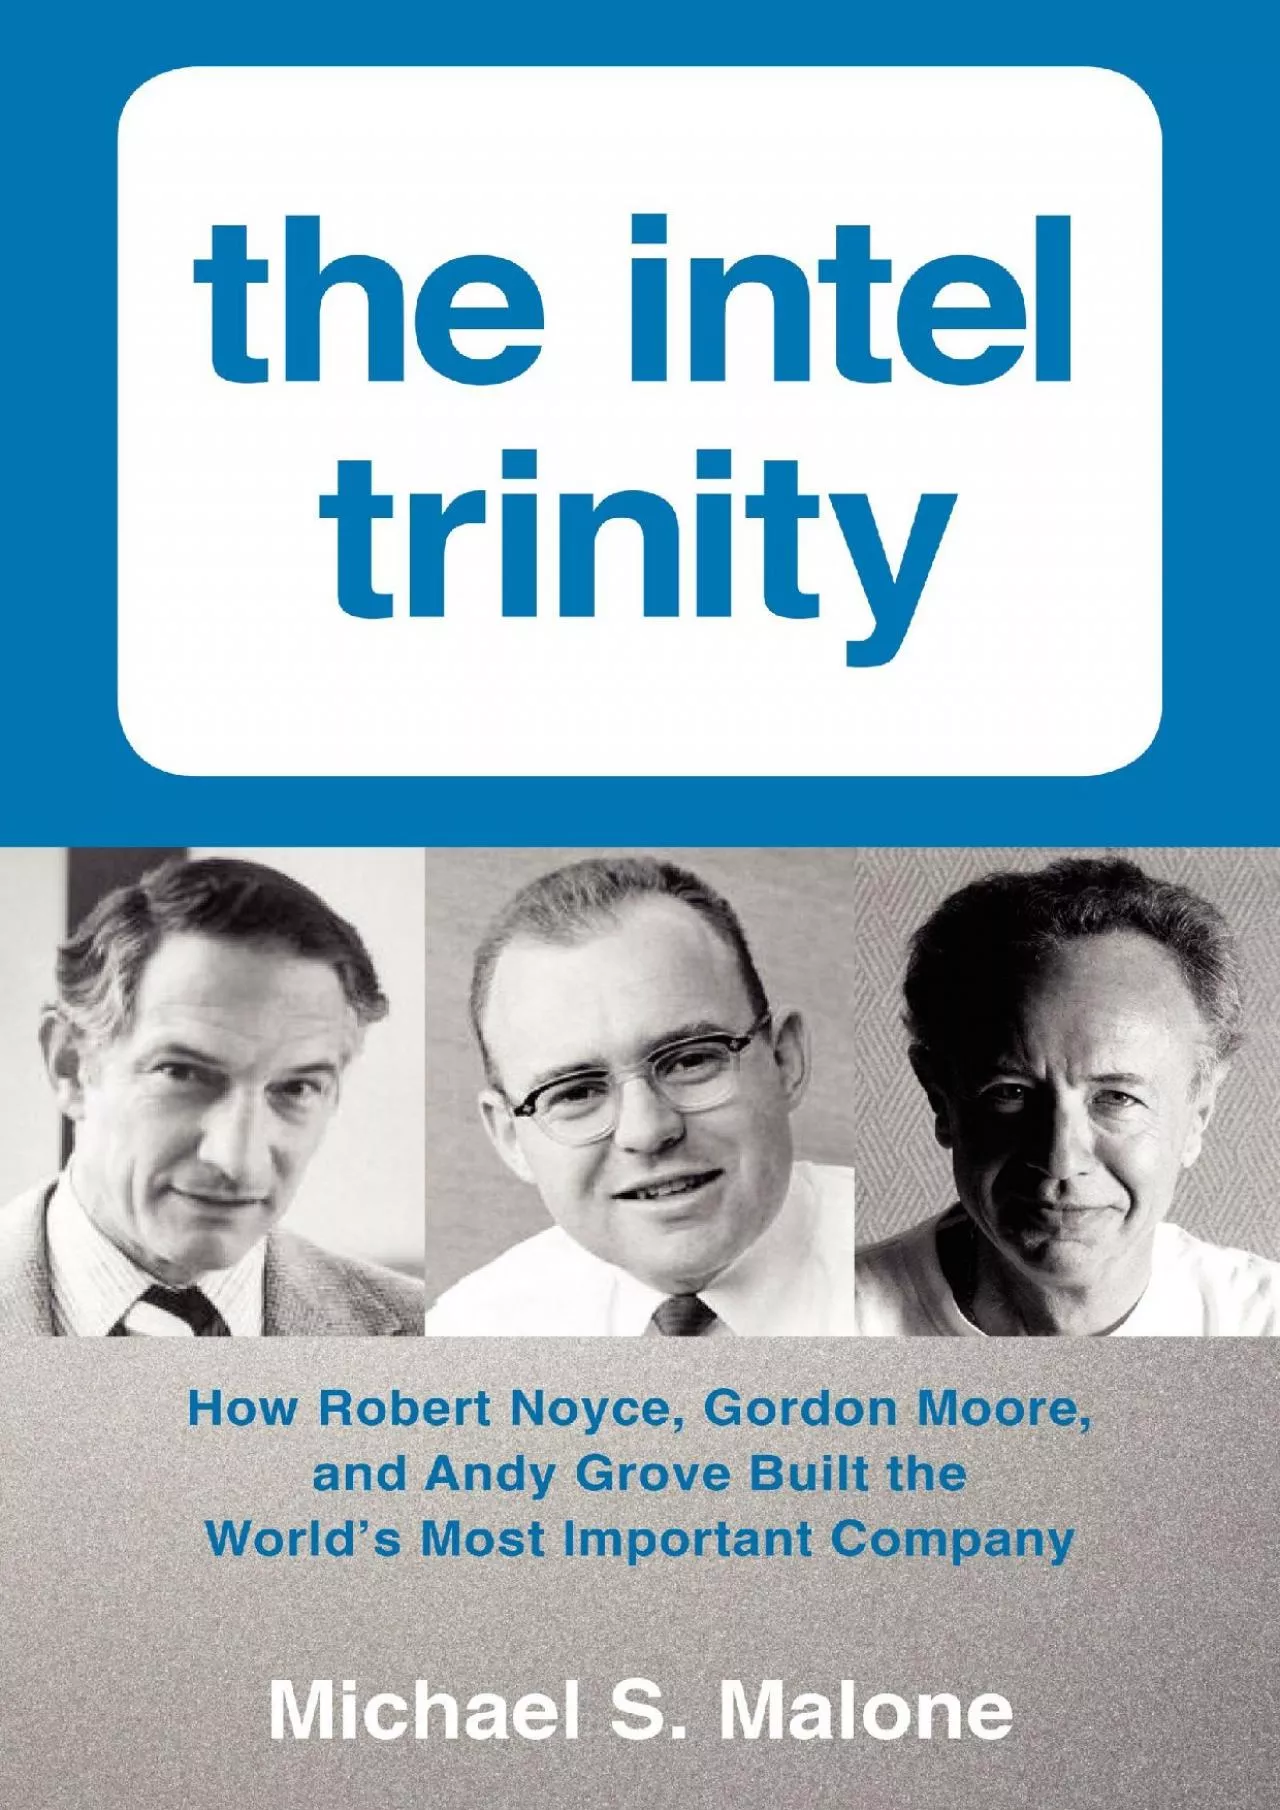 [BOOK]-The Intel Trinity: How Robert Noyce, Gordon Moore, and Andy Grove Built the World\'s